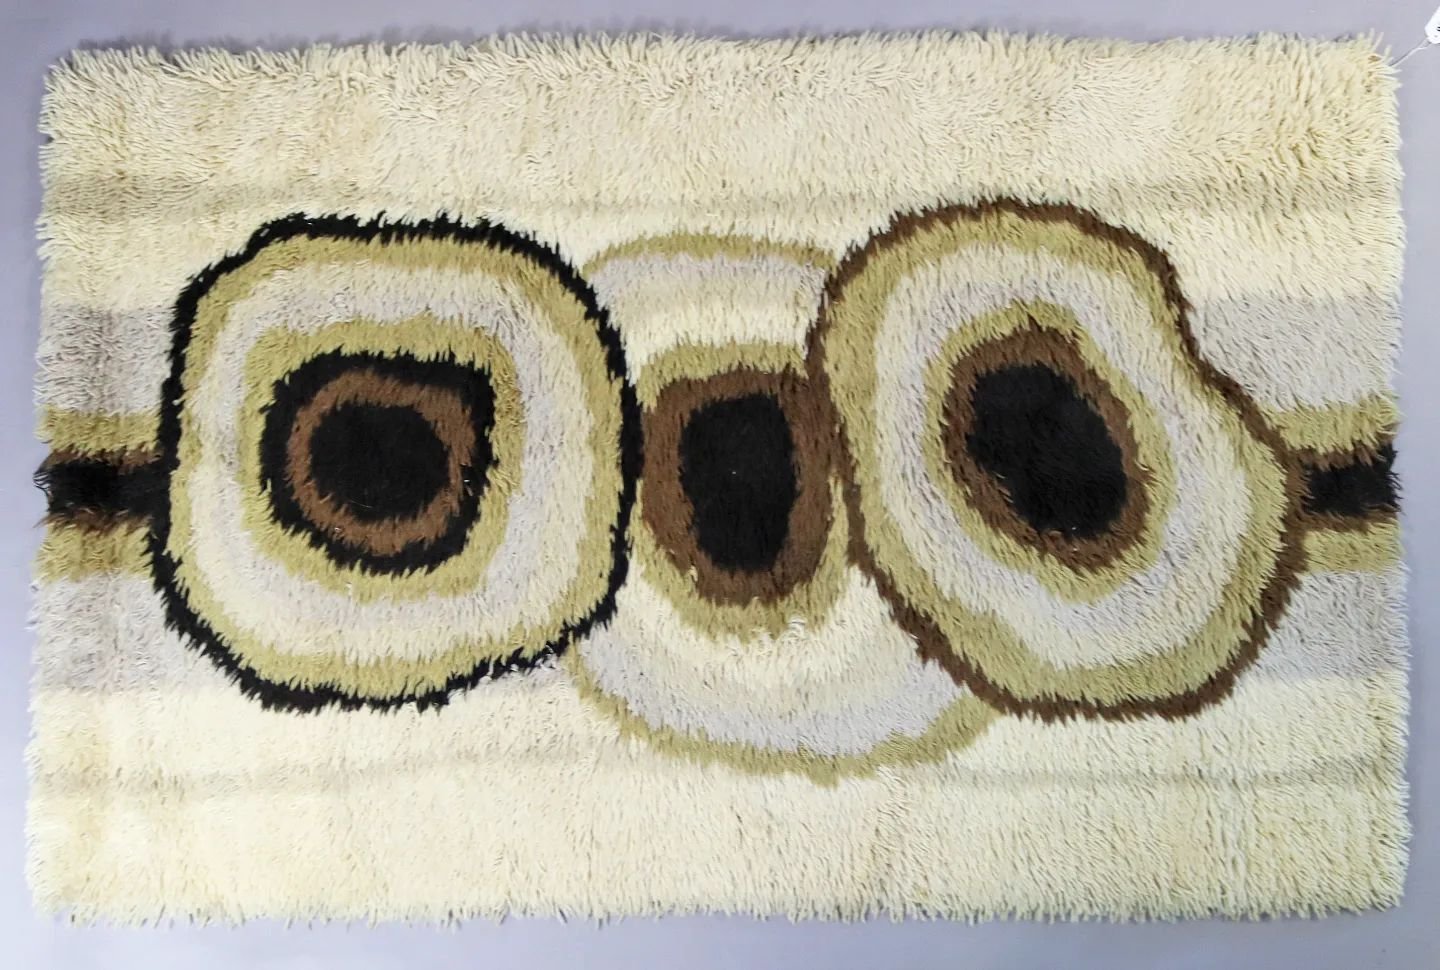 .
1960s Ege Rya 100% wool rug

Lot 156 in our 14th May Decorative &amp; Household Sale 

Browse and bid online 

.

.

.

.

.

.

.

.

.

#antiques #vintage #interiors #interiordesign #1960s #1960sstyle #1960svintage #60sdesign #danishinterior #dan